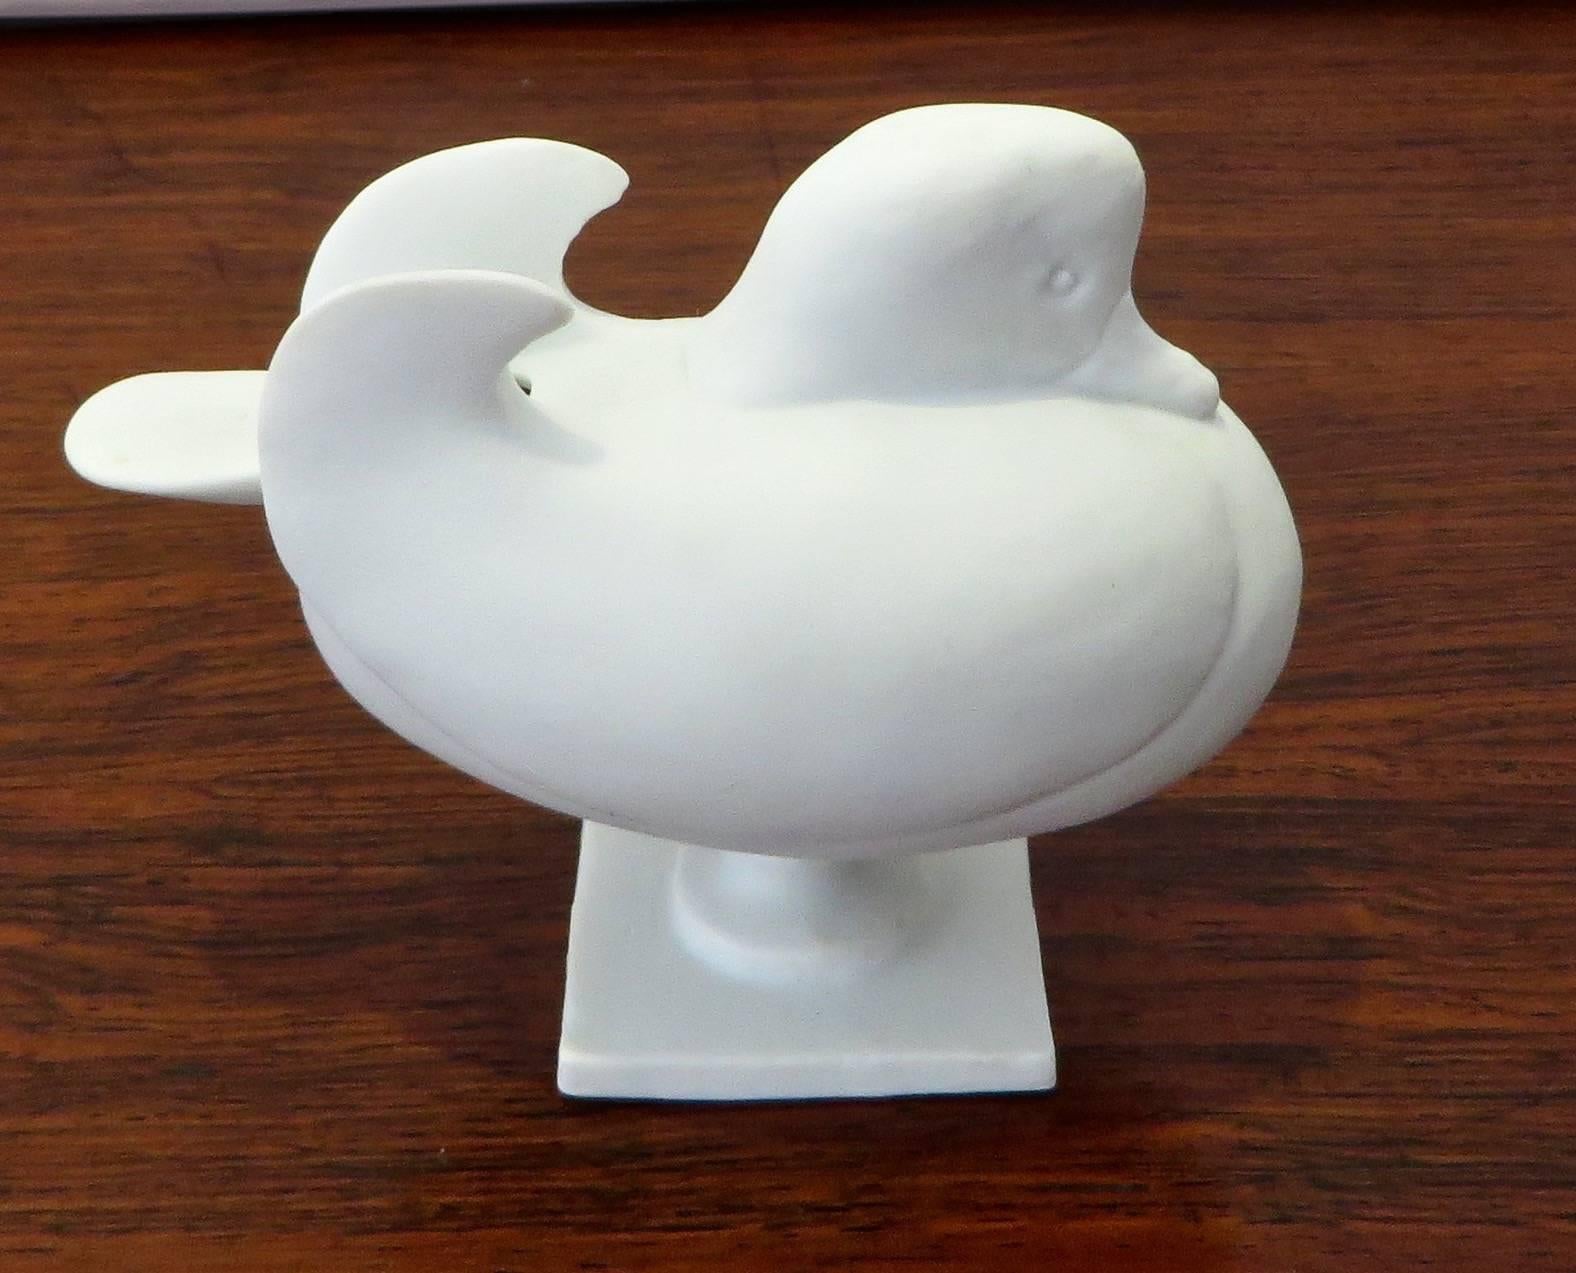 A pair of French Porcelain Salt Cellars by Francois-Xavier Lalanne designed for Porcelain de Sevres, Paris. 
Done as ducks, the tail is the spoon and removes to reveal the receptacle for the salt. 
Two available, one whose head faces forward, the